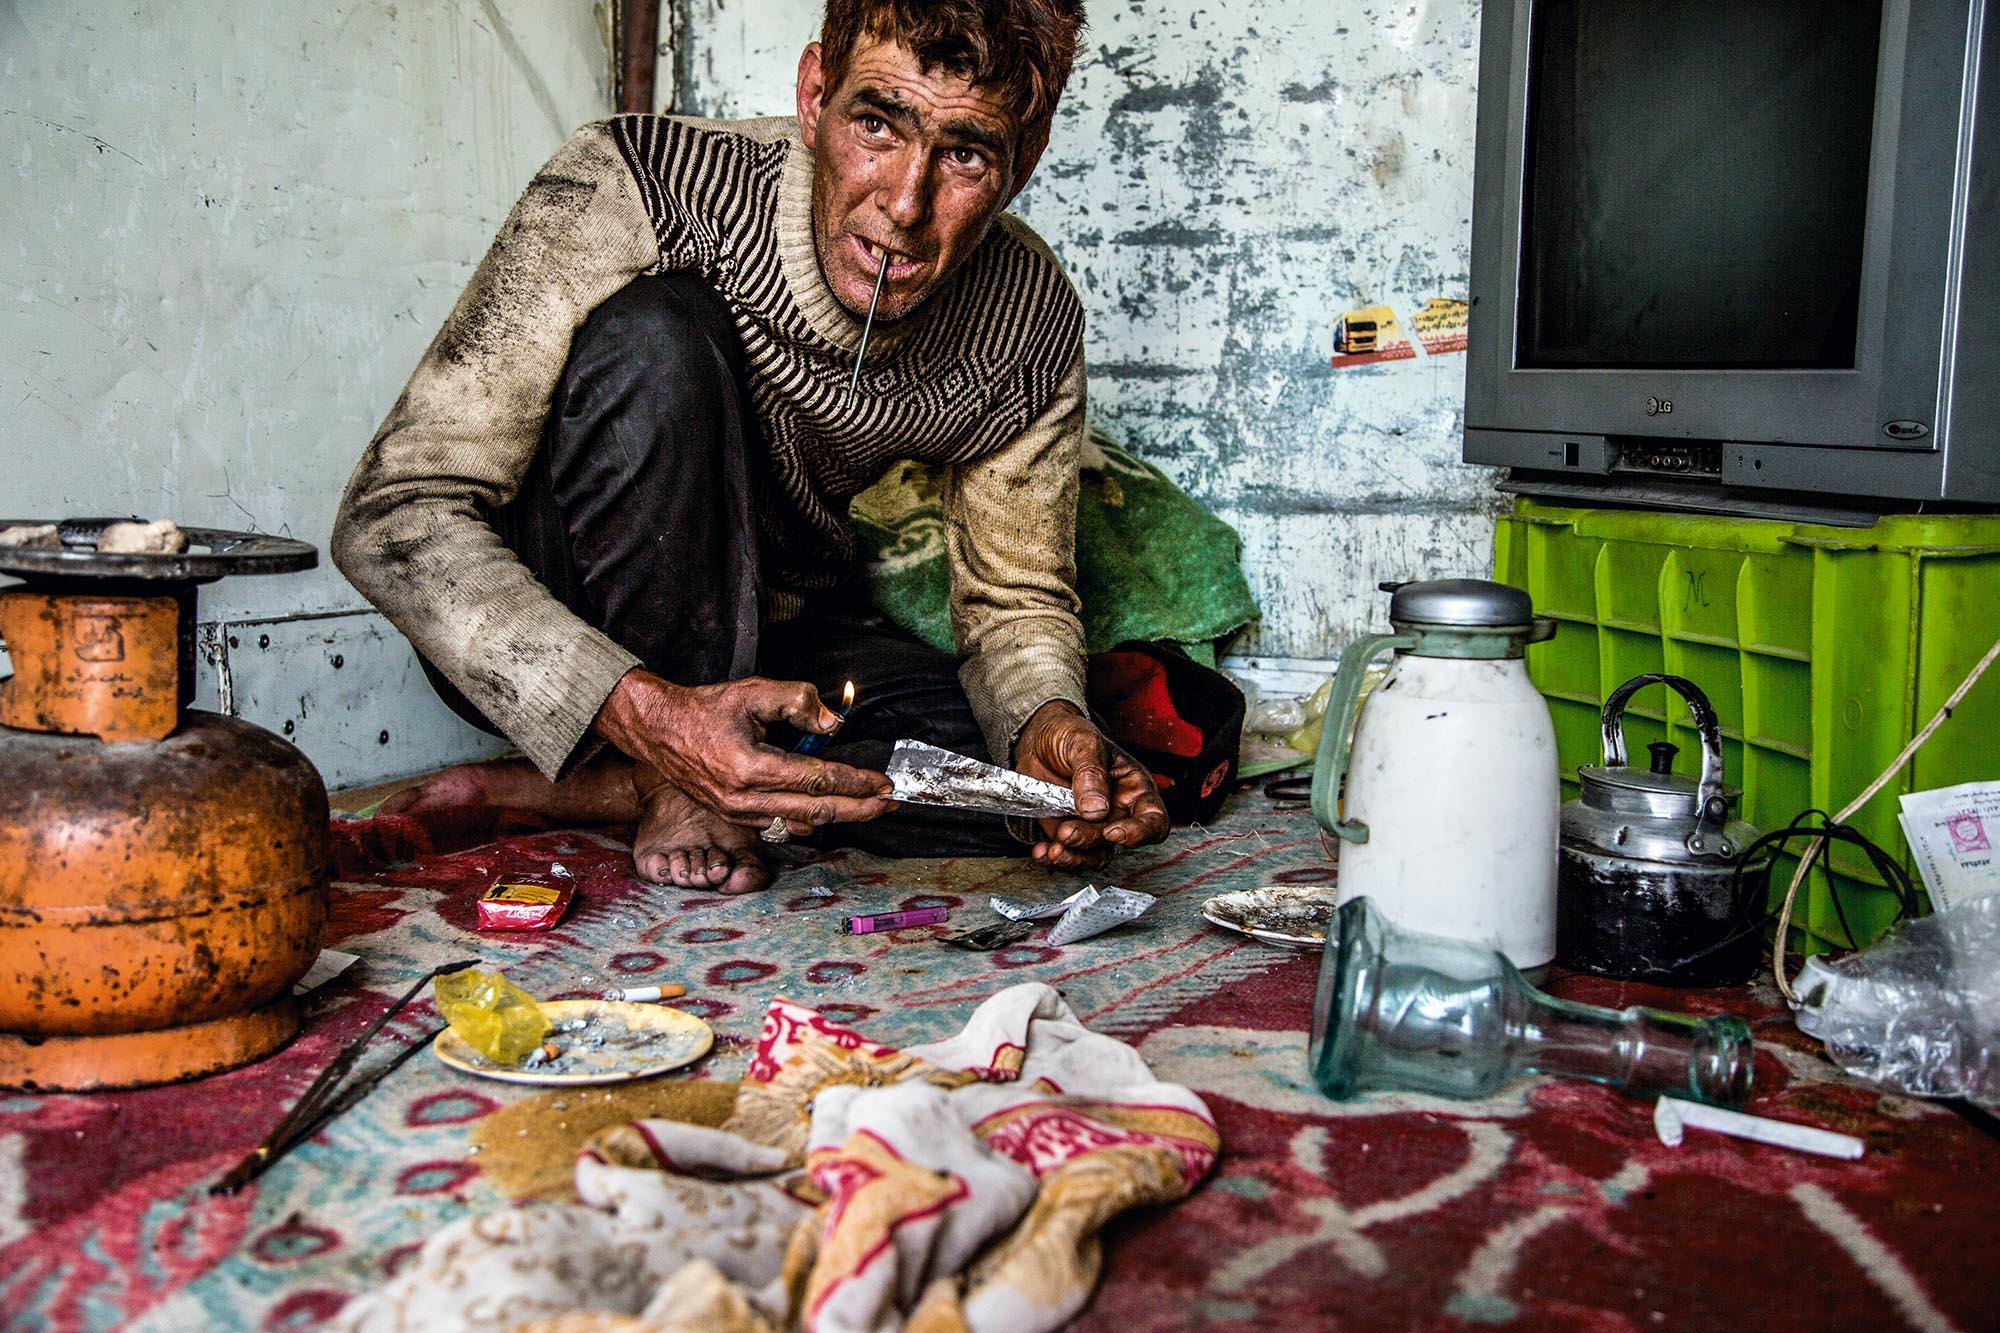 The last & lost nomades of Iran - Ahmad at work, smoking heroin. “I’d like to give it up....